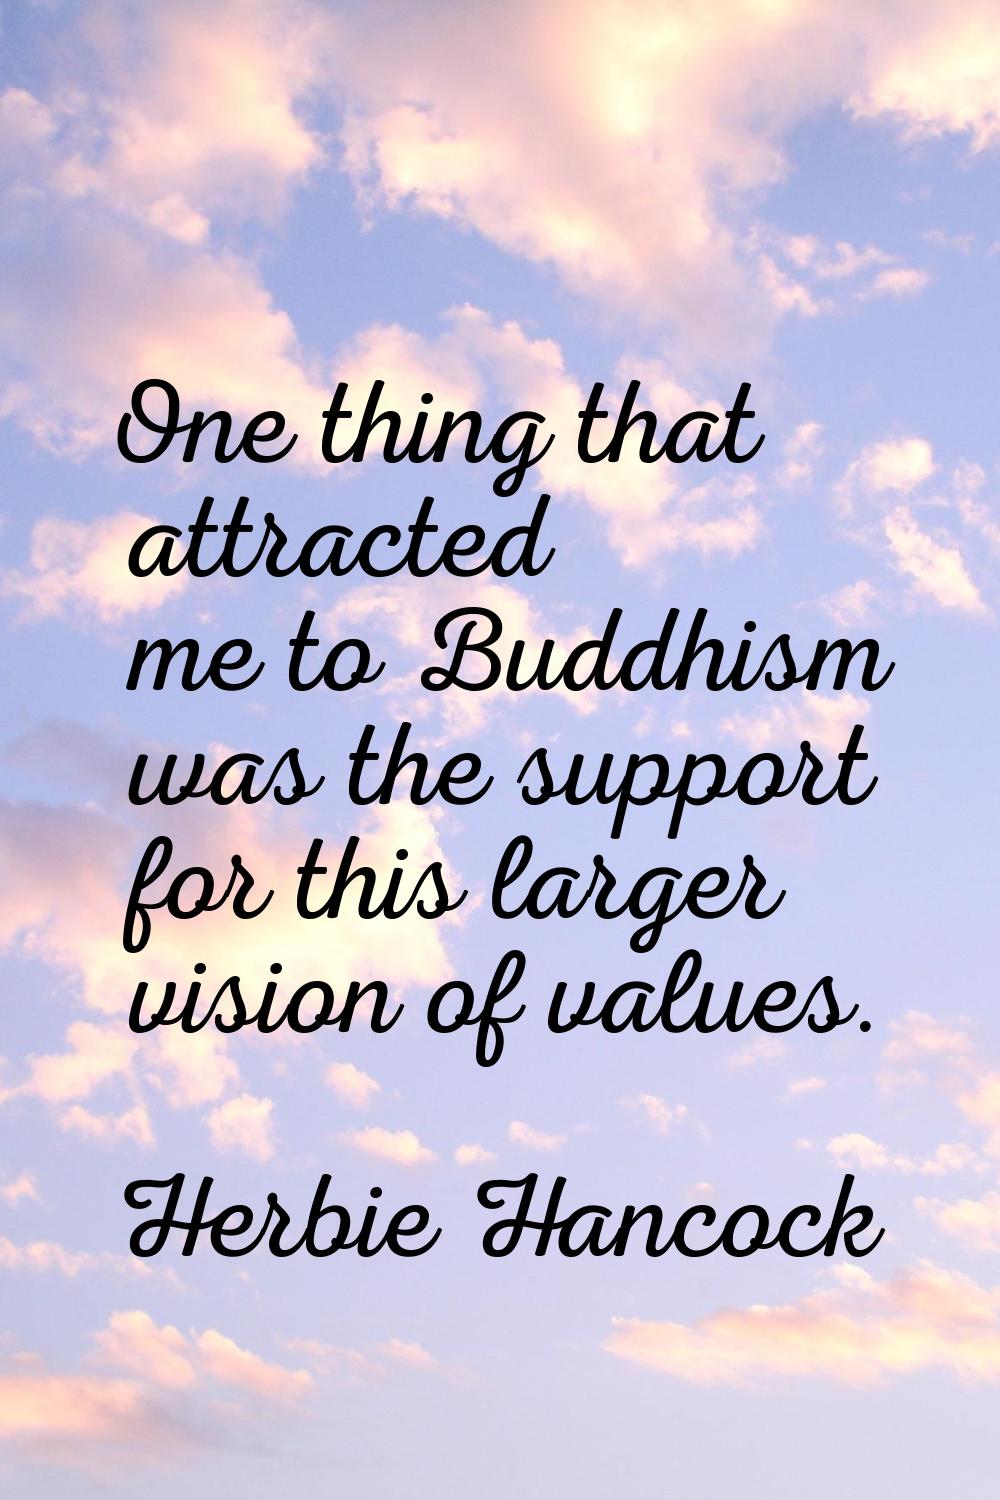 One thing that attracted me to Buddhism was the support for this larger vision of values.